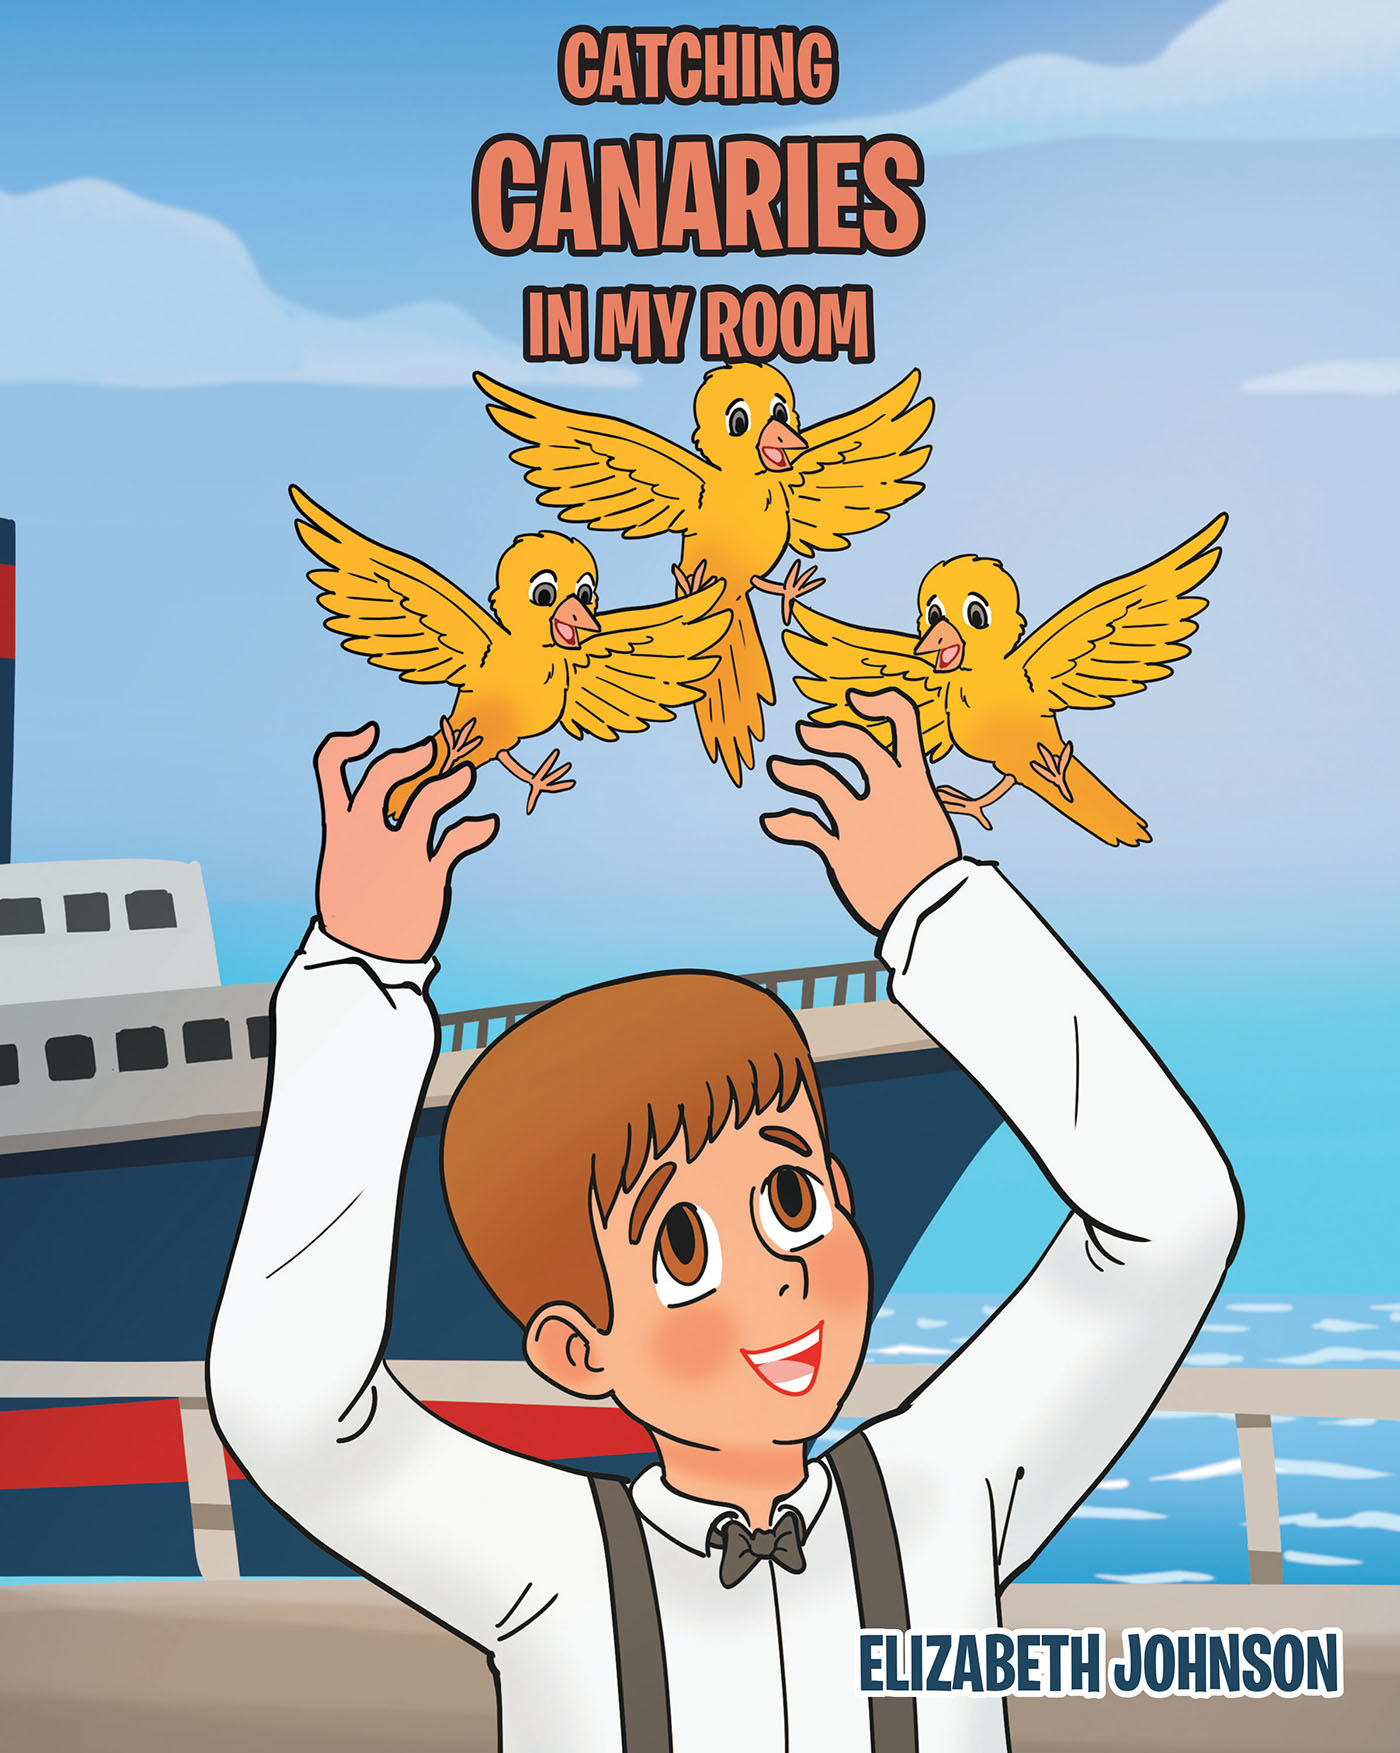 Author Elizabeth Johnson’s New Book, "Catching Canaries in My Room," is a Fun, True Story of a Young Boy and His Dad on a Voyage to America